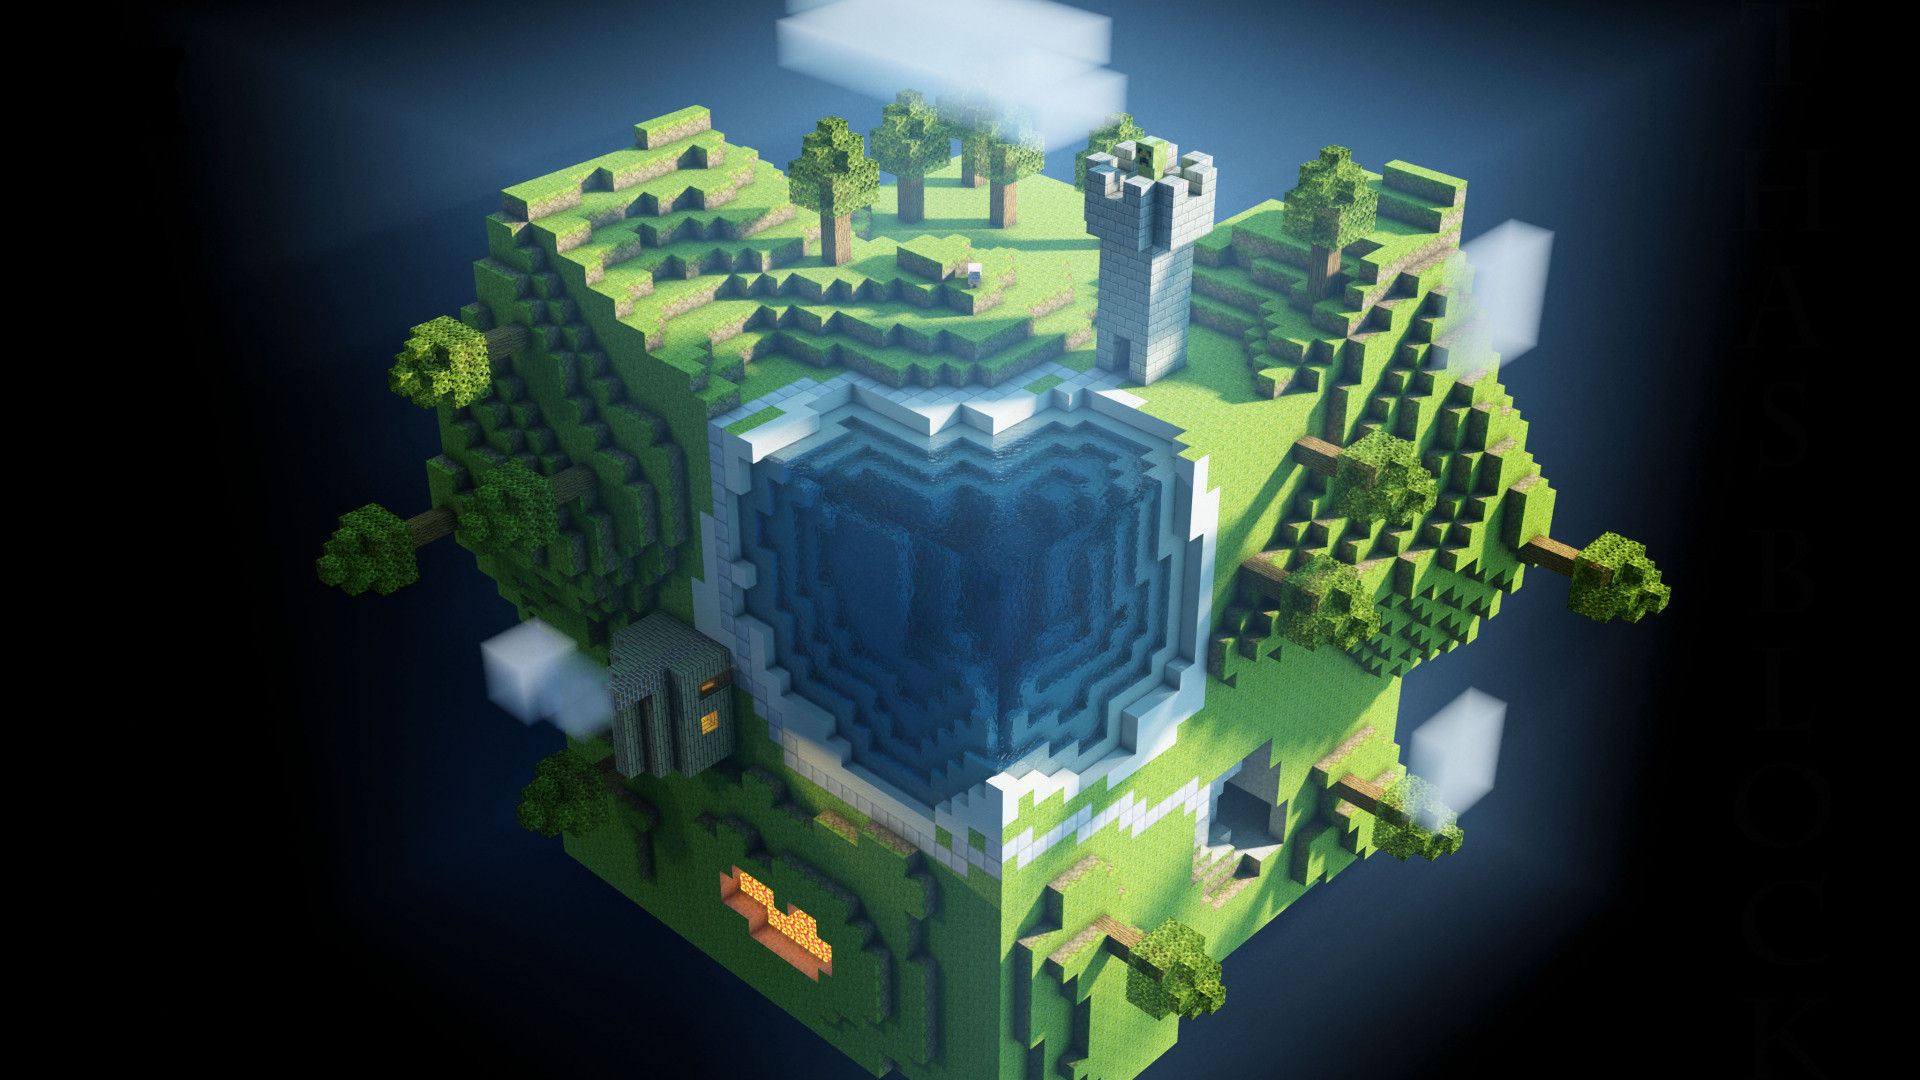 Preview Wallpaper Minecraft Planet Cube Cubes World 1920x1080 1920x1080